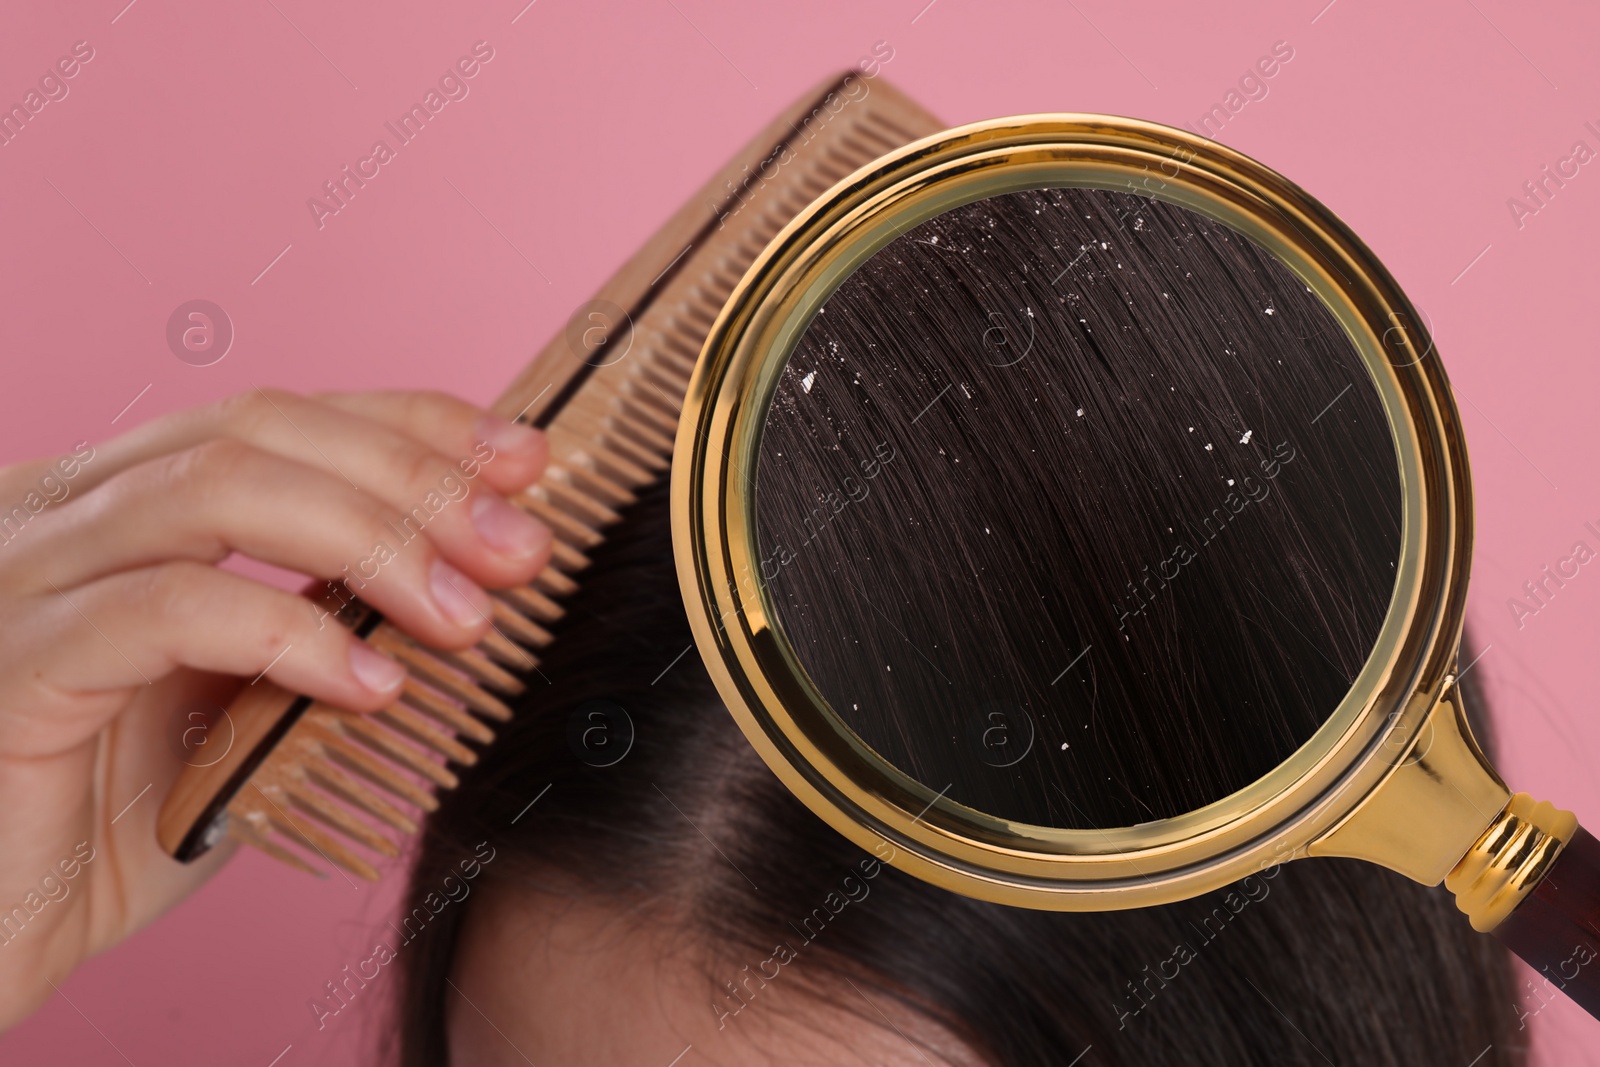 Image of Woman suffering from dandruff on pink background, closeup. View through magnifying glass on hair with flakes